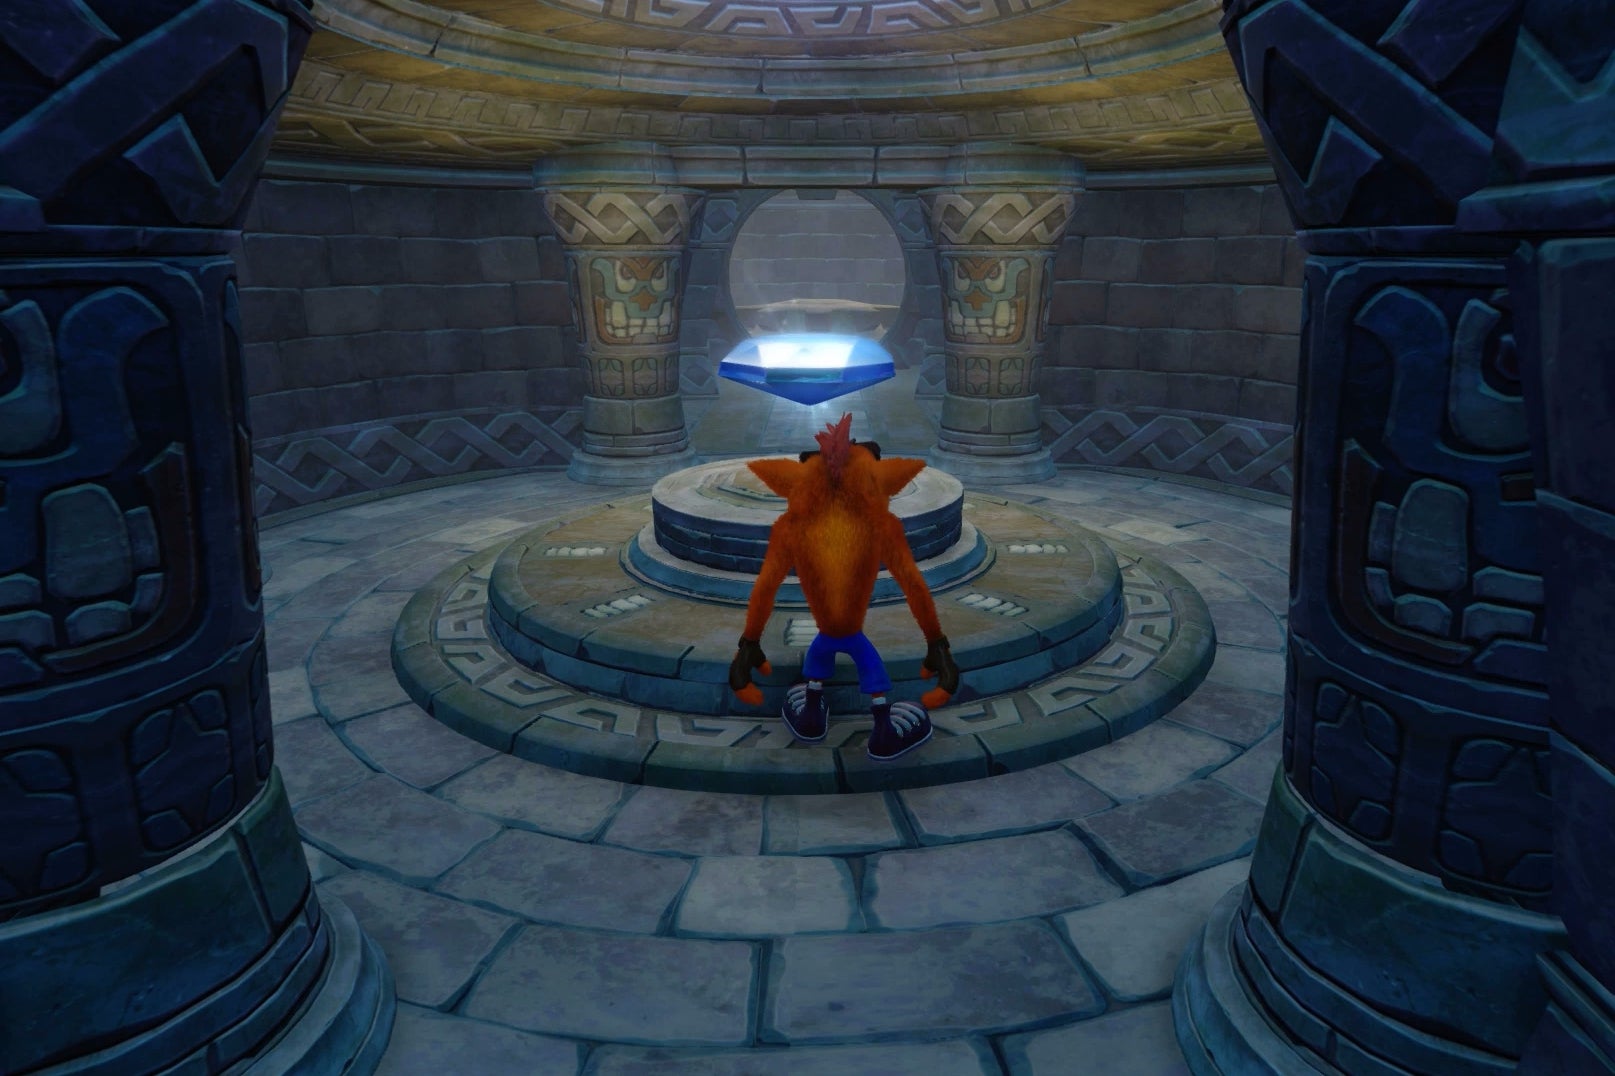 Crash Bandicoot Gems walkthrough: All green, white, red, blue, purple, yellow coloured Gem locations, Key locations, Secret Levels and how to 100% each game Eurogamer.net